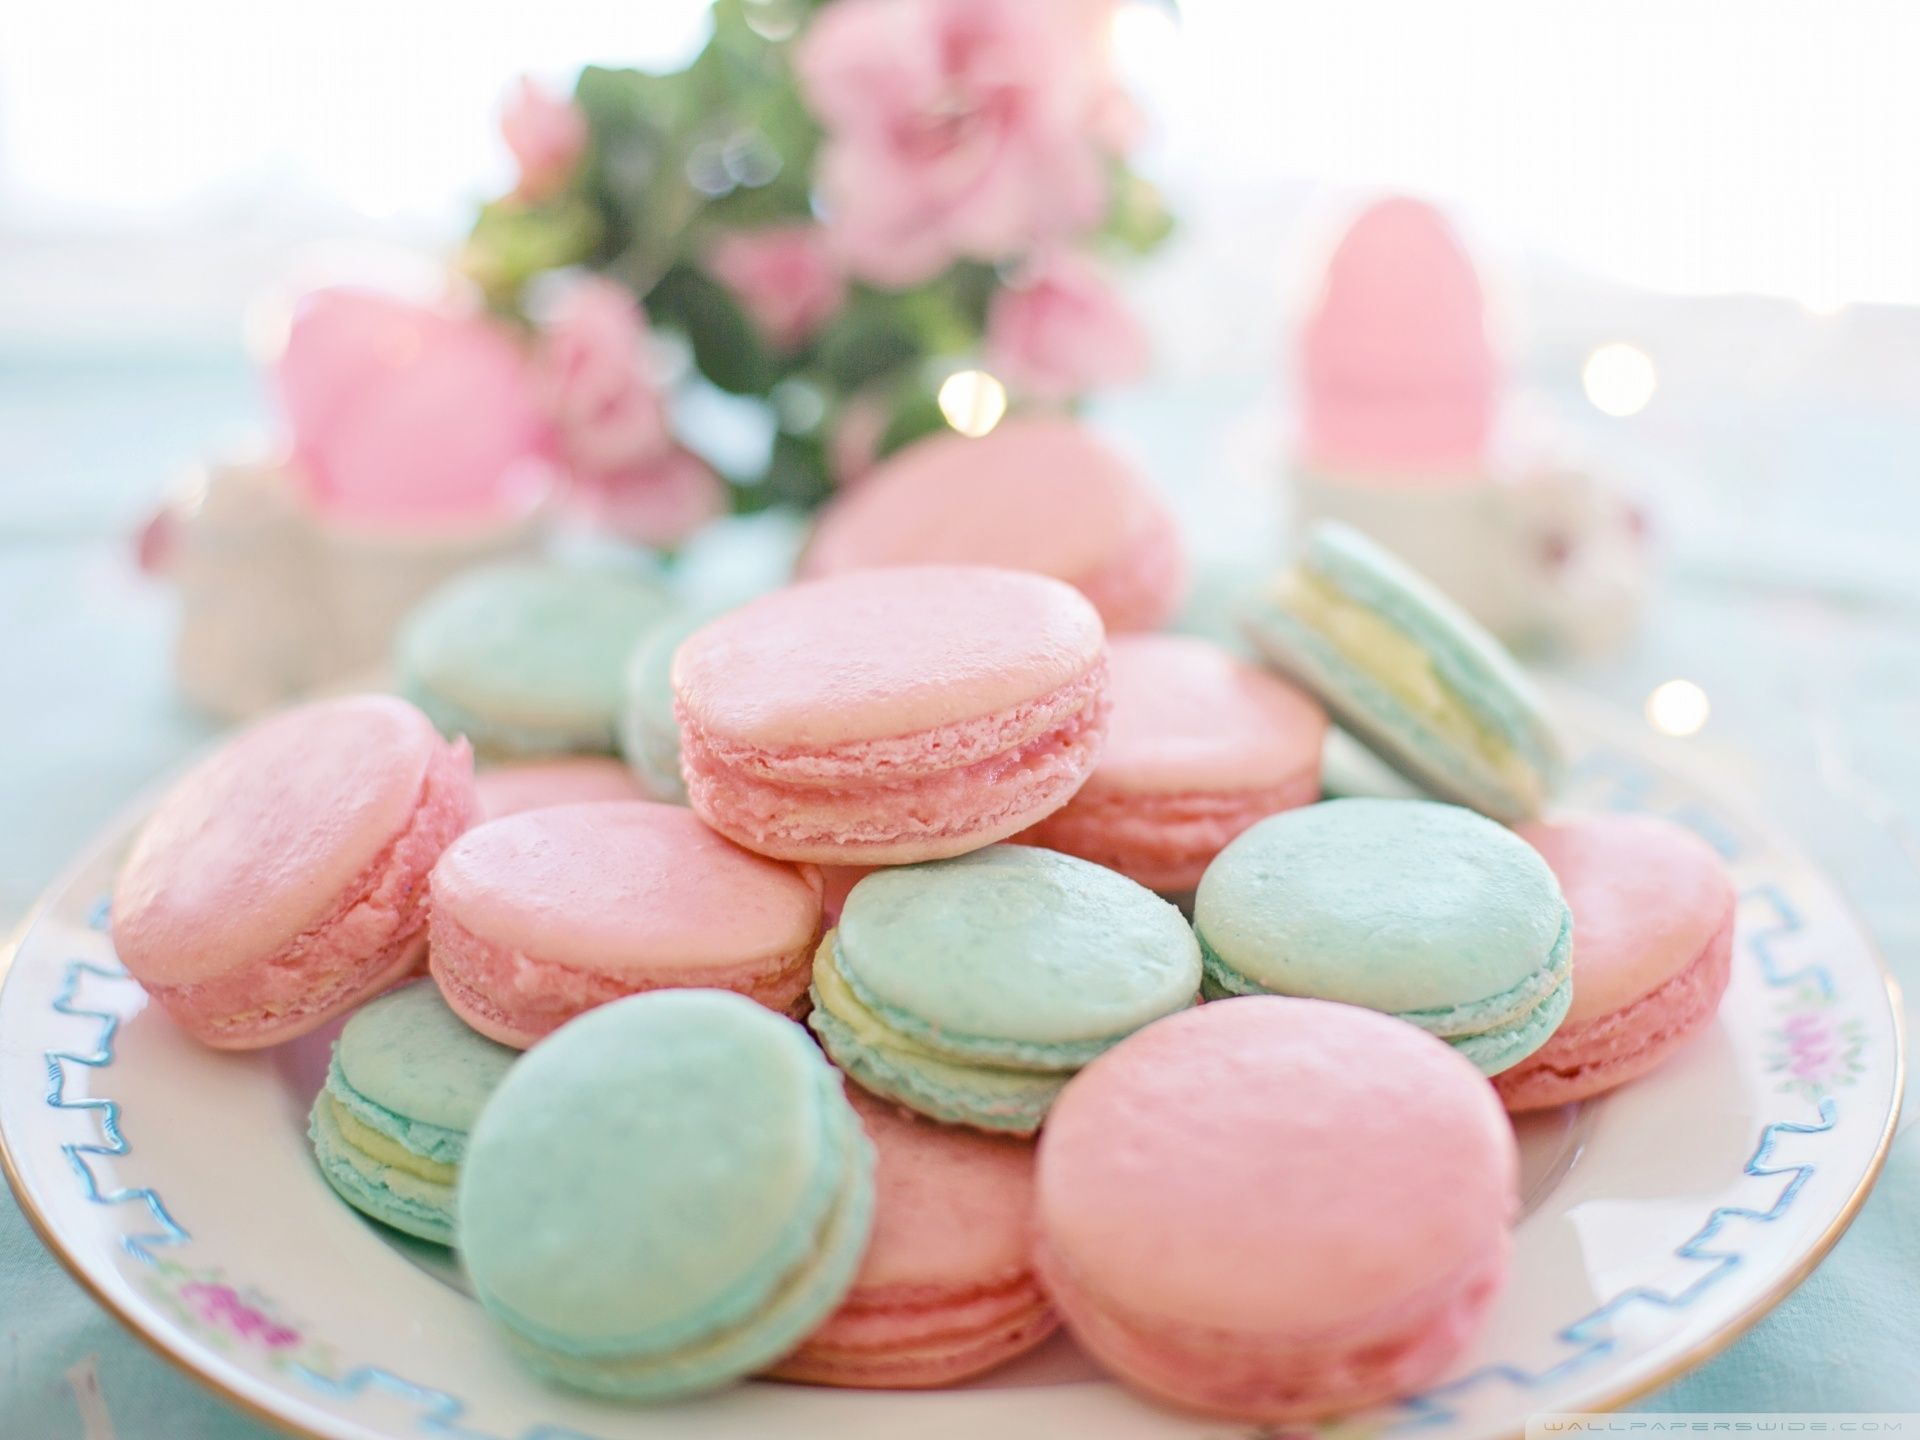 A plate of macaroons on a table - Macarons